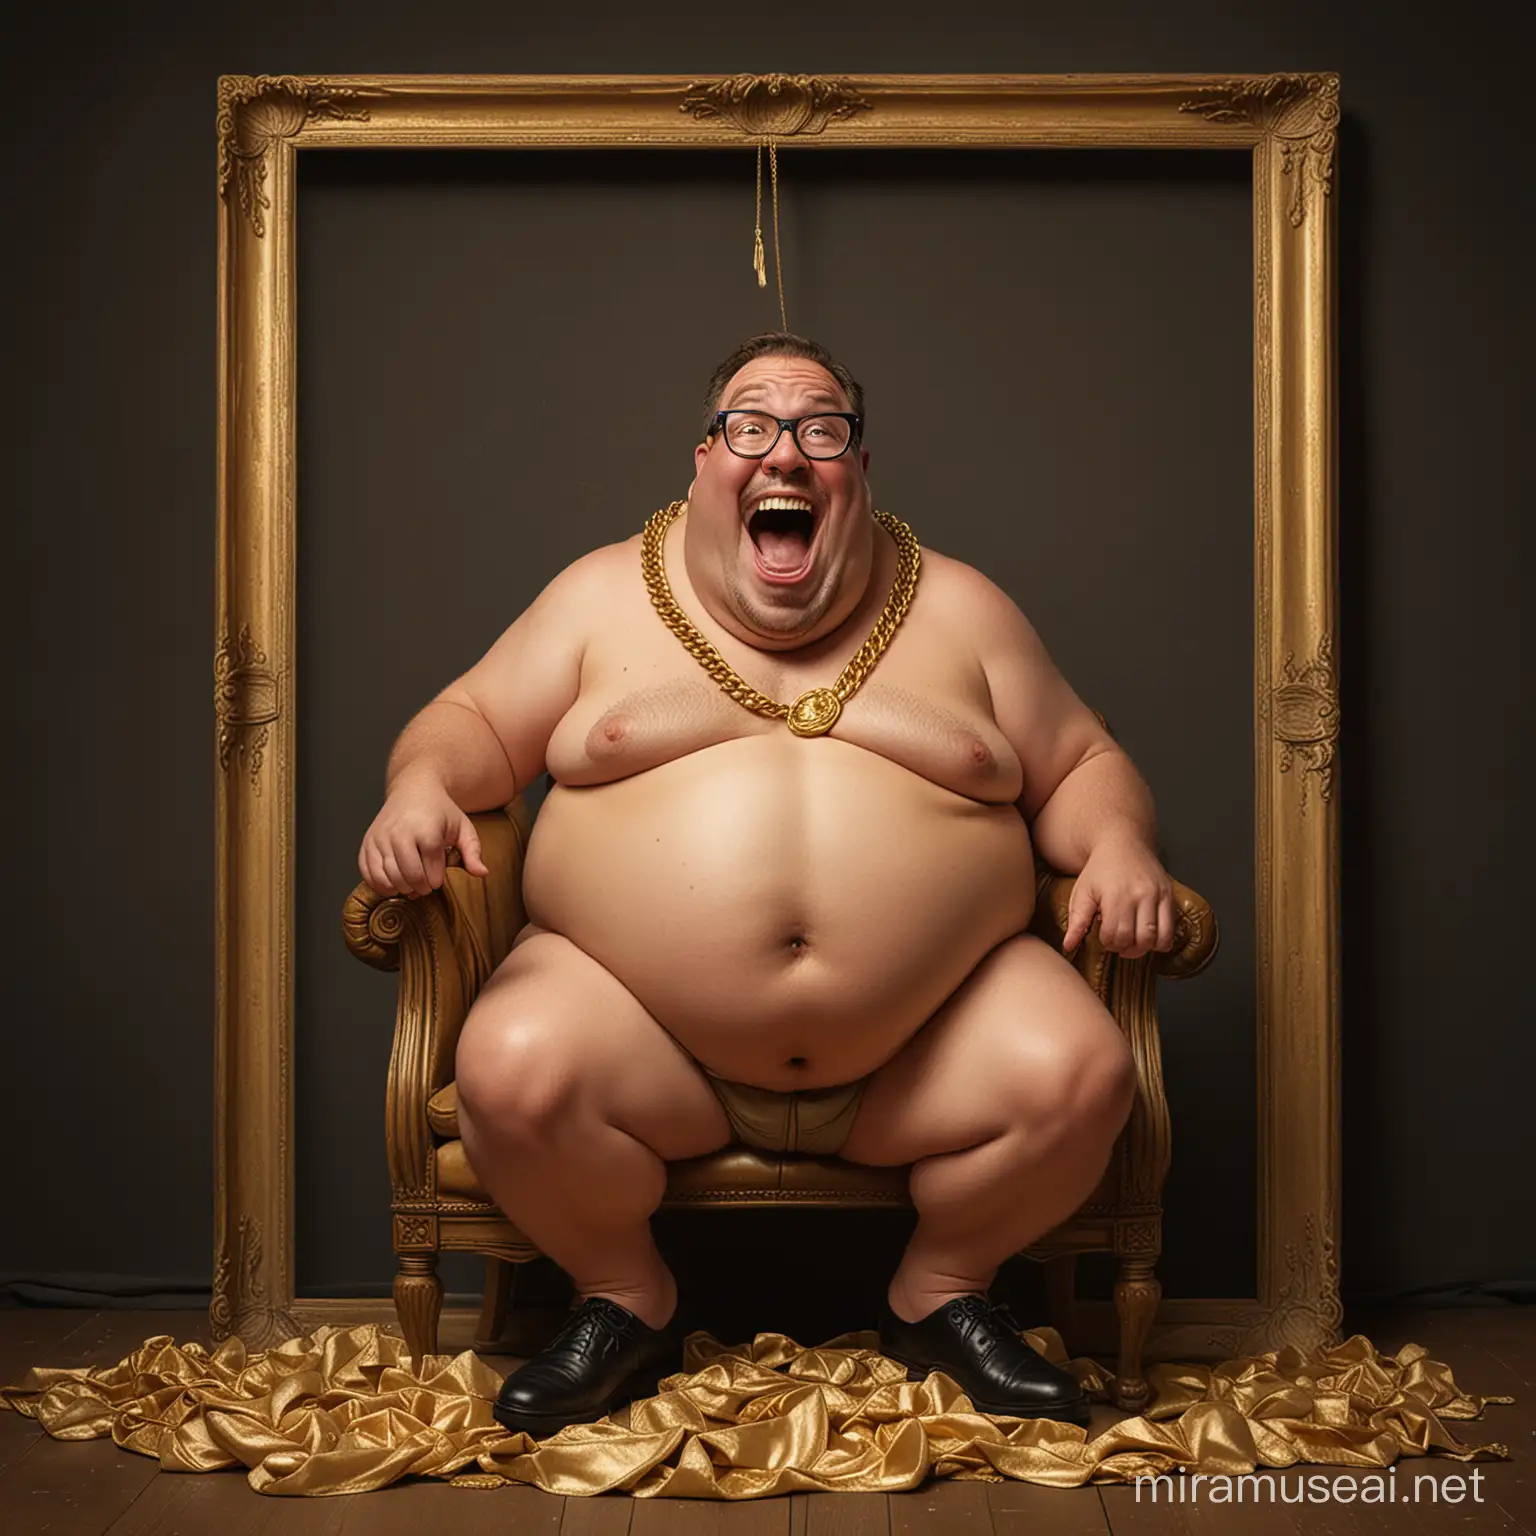 Laughing Fat Man with Cold Chains Necklace and Oversized Glasses